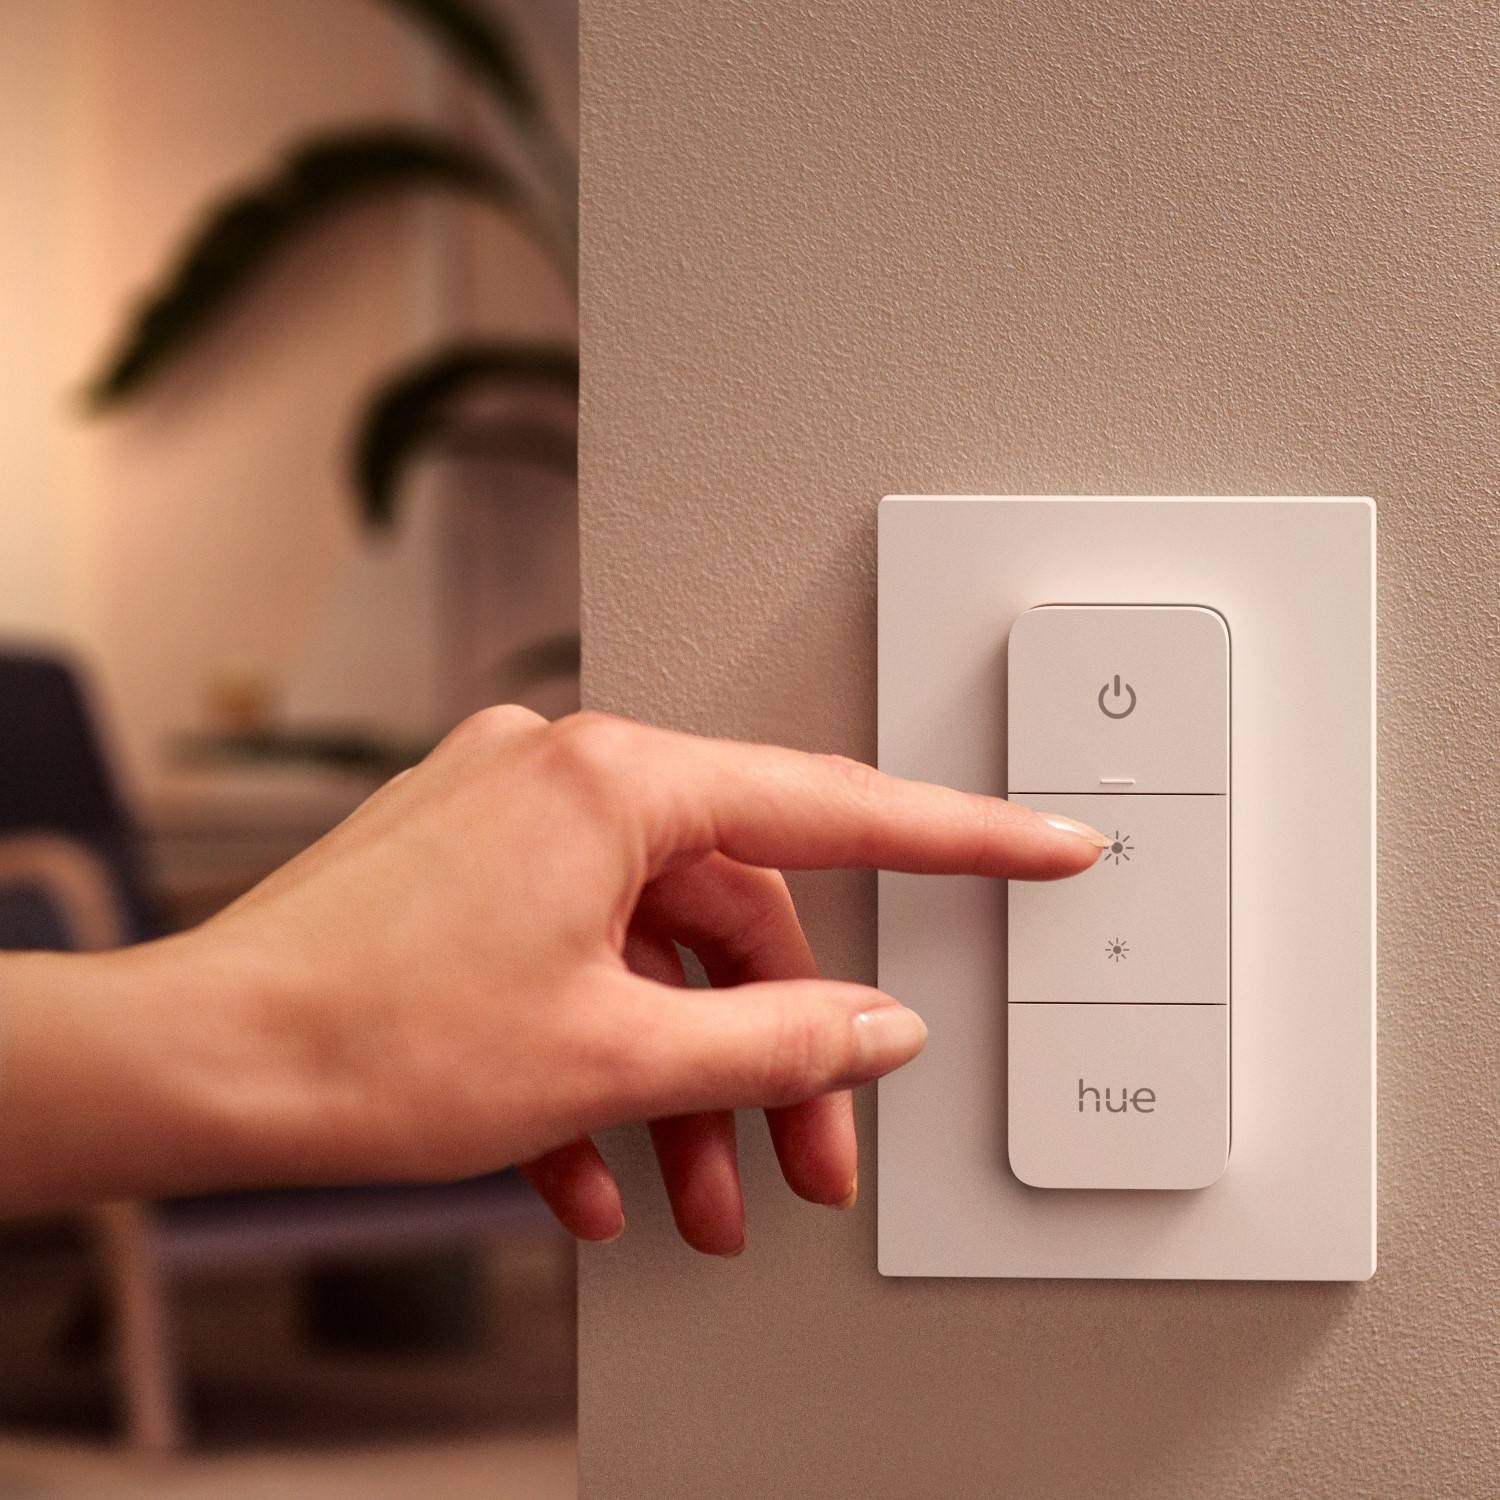 PHILIPS HUE Lumière connectée Dimmer Switch - HUE-DIMMER-SWITCH